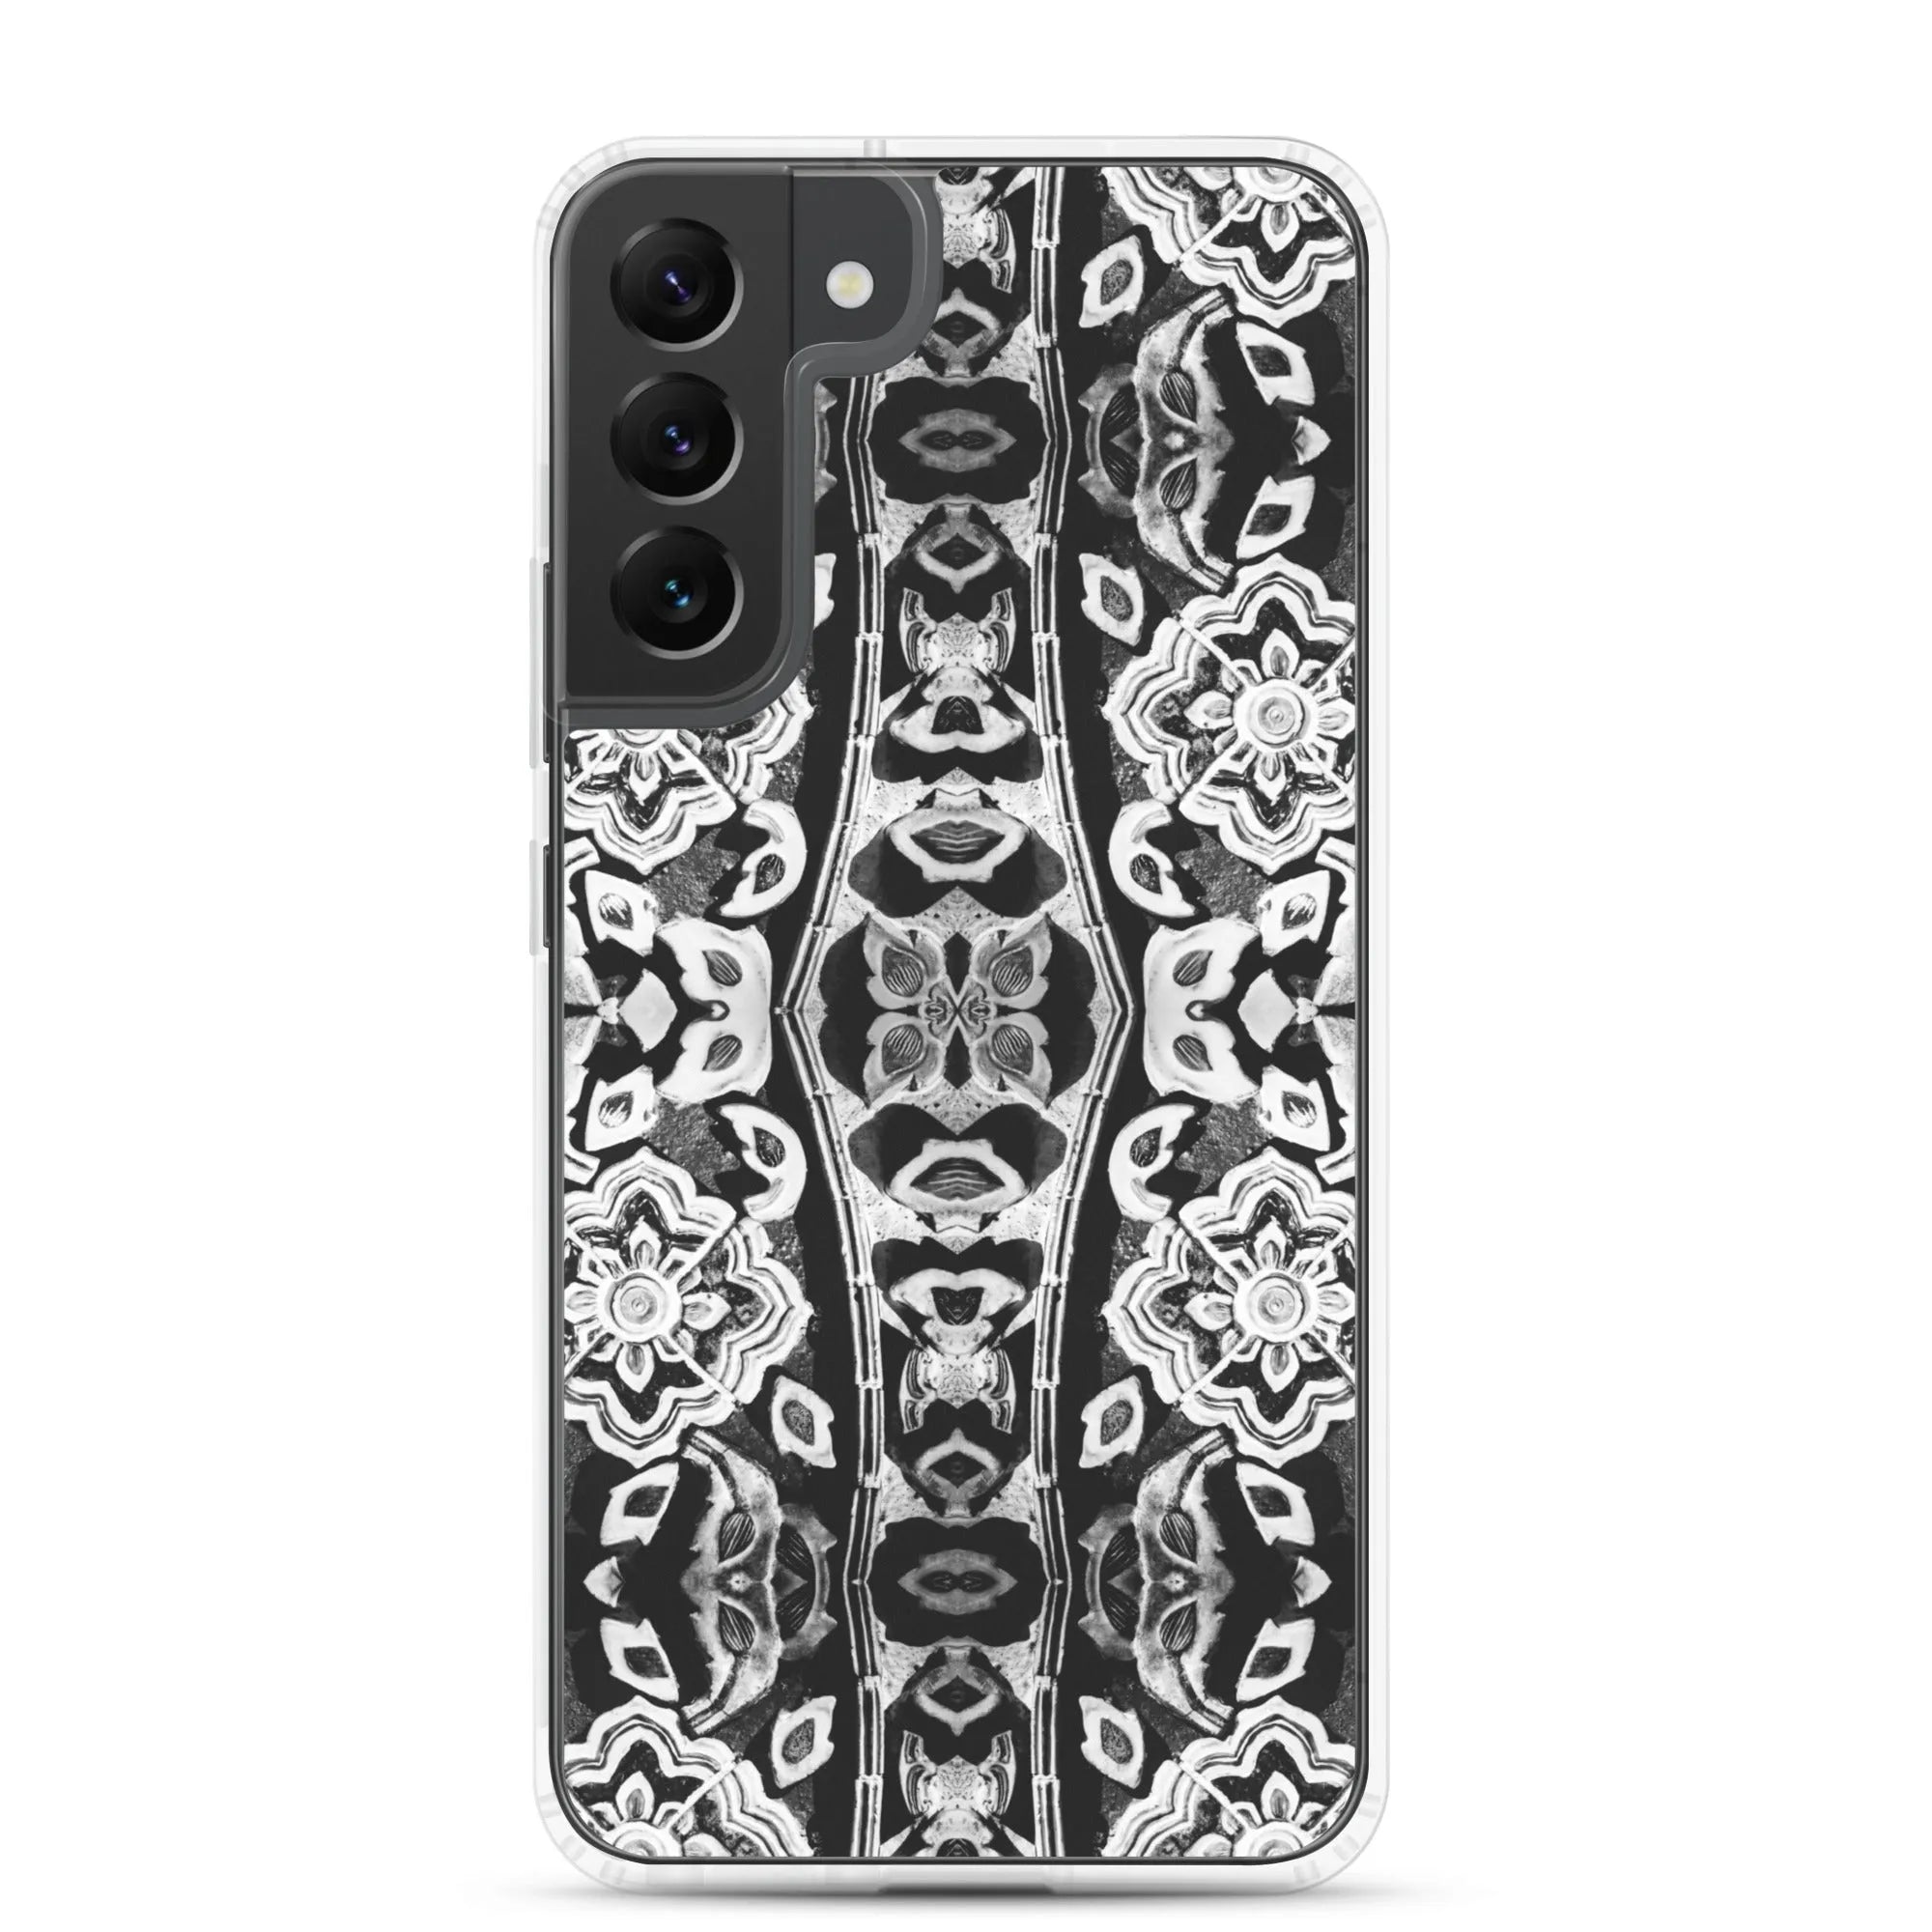 Masala Thai Samsung Galaxy Case - Black And White - Samsung Galaxy S22 Plus - Mobile Phone Cases - Aesthetic Art